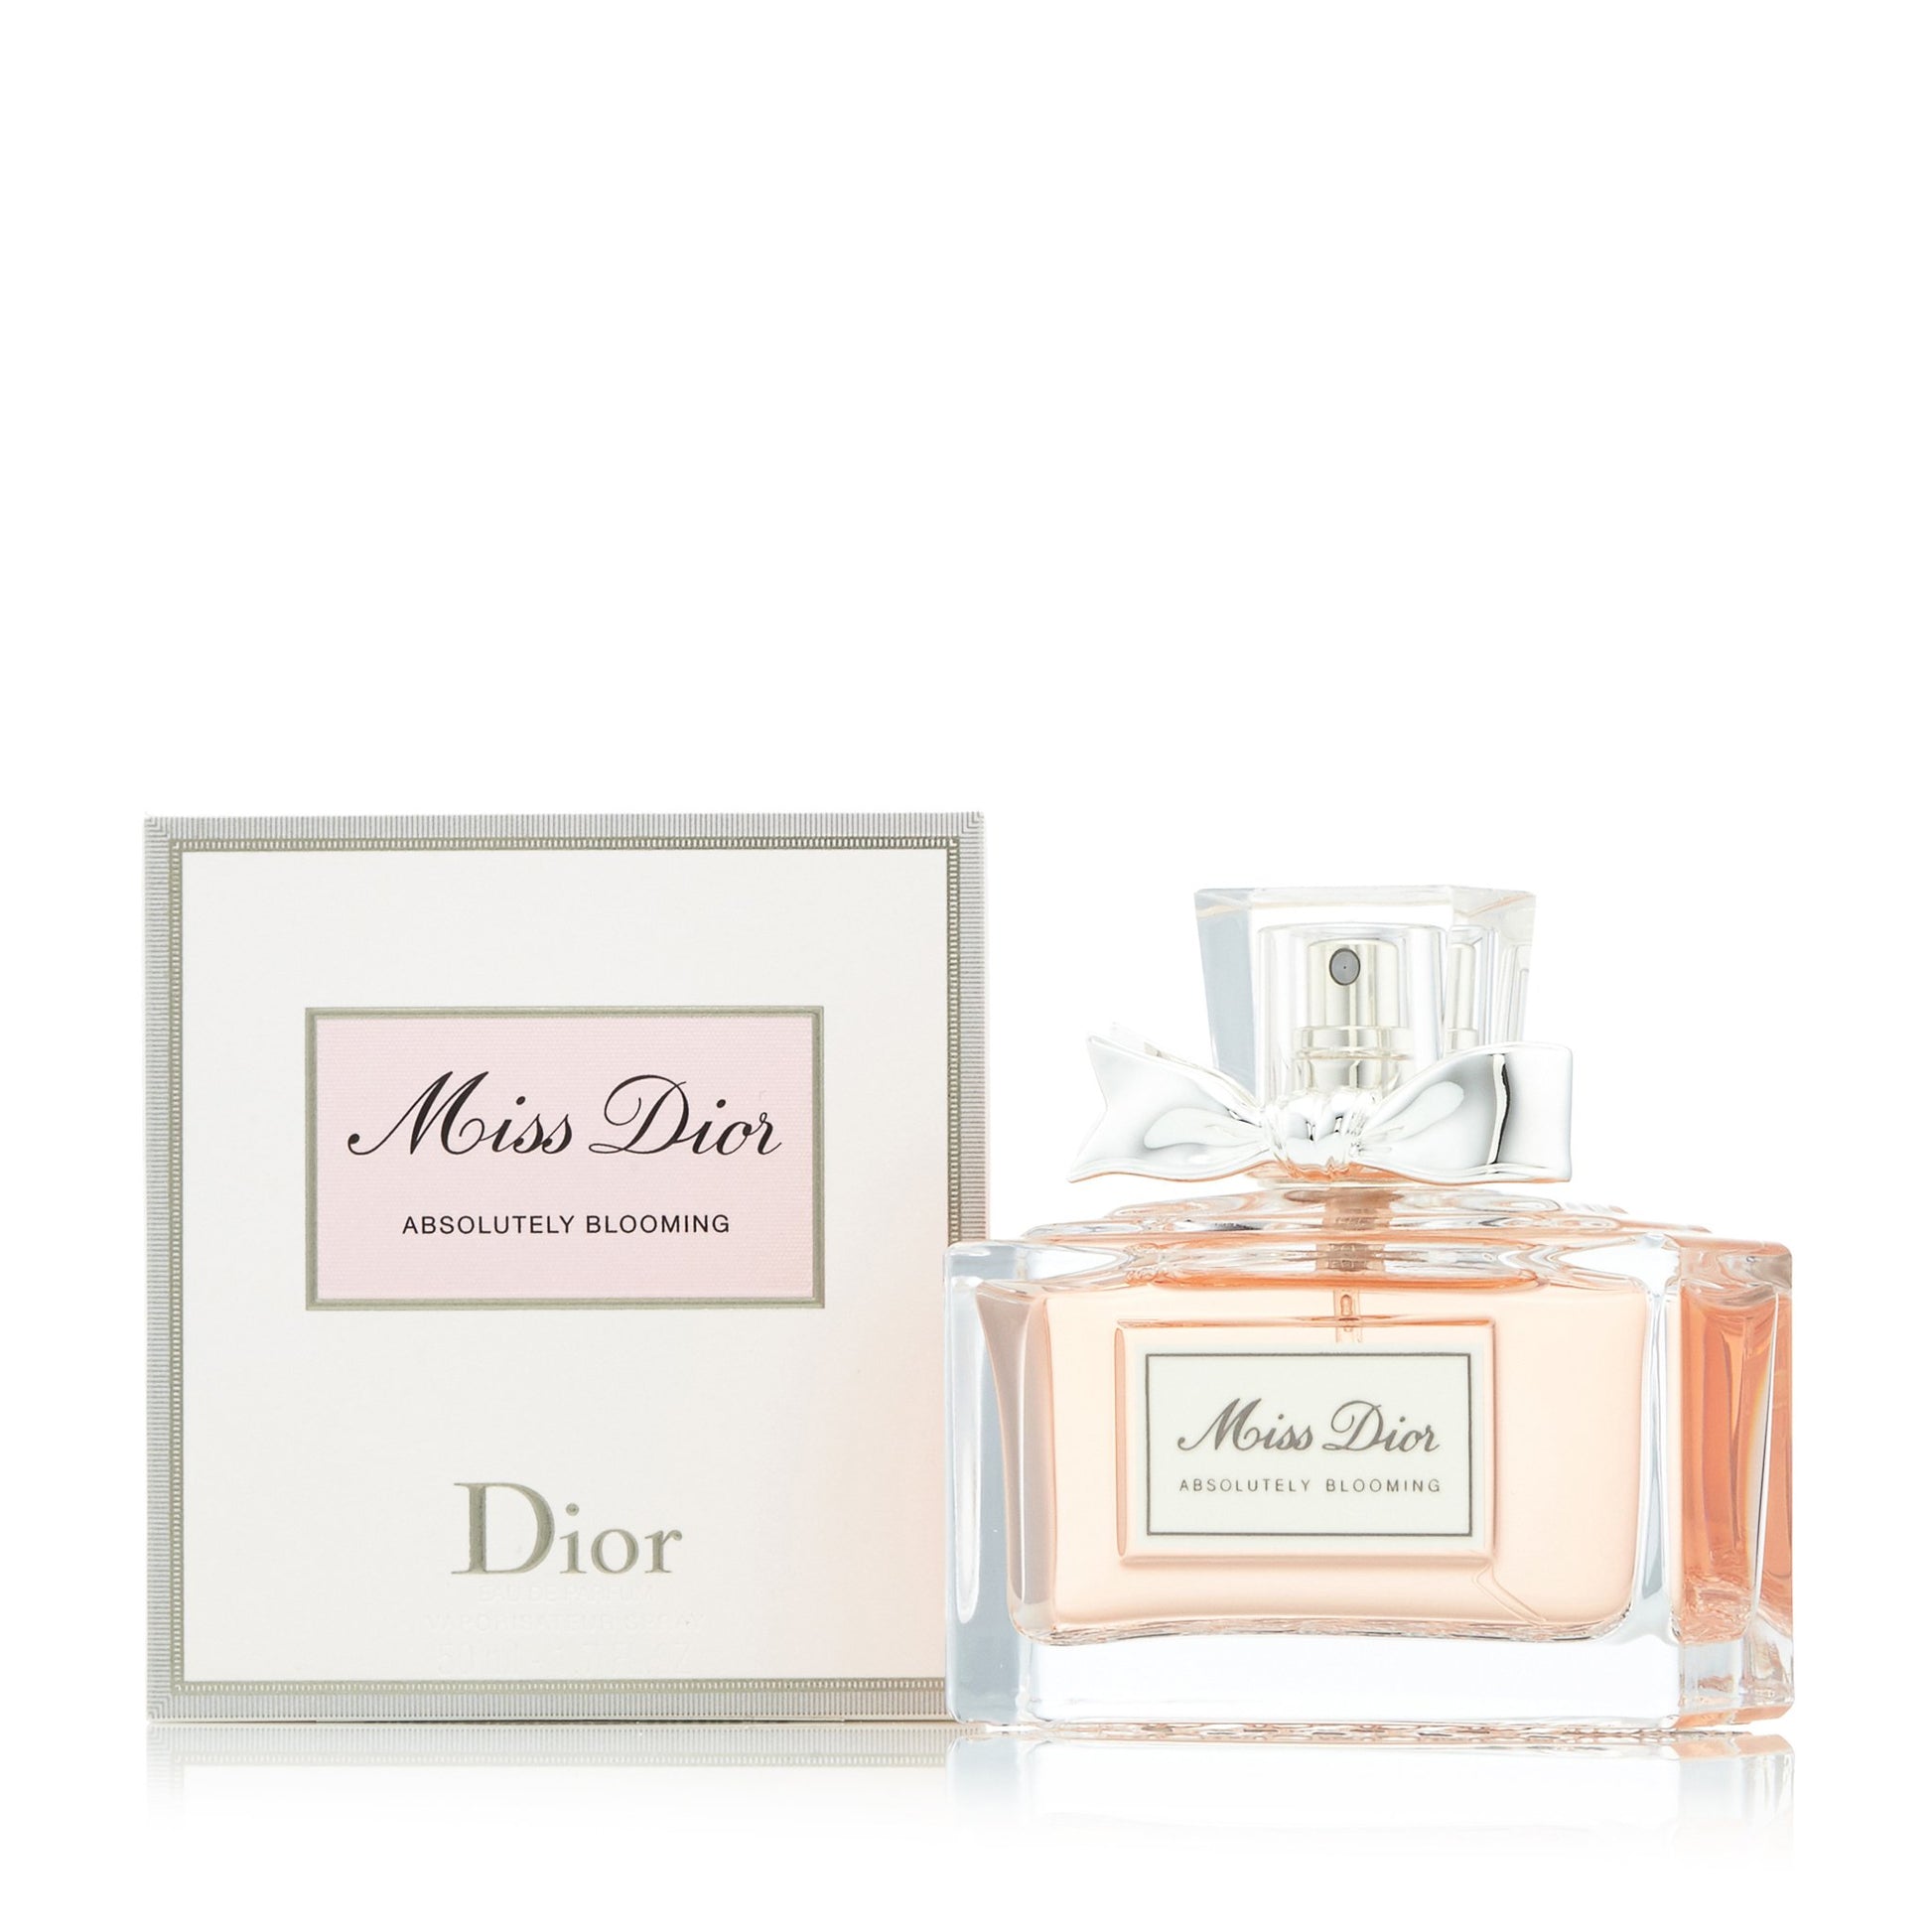 Miss Dior Absolutely Blooming Eau de Parfum Spray for Women by Dior 3.4 oz. Click to open in modal